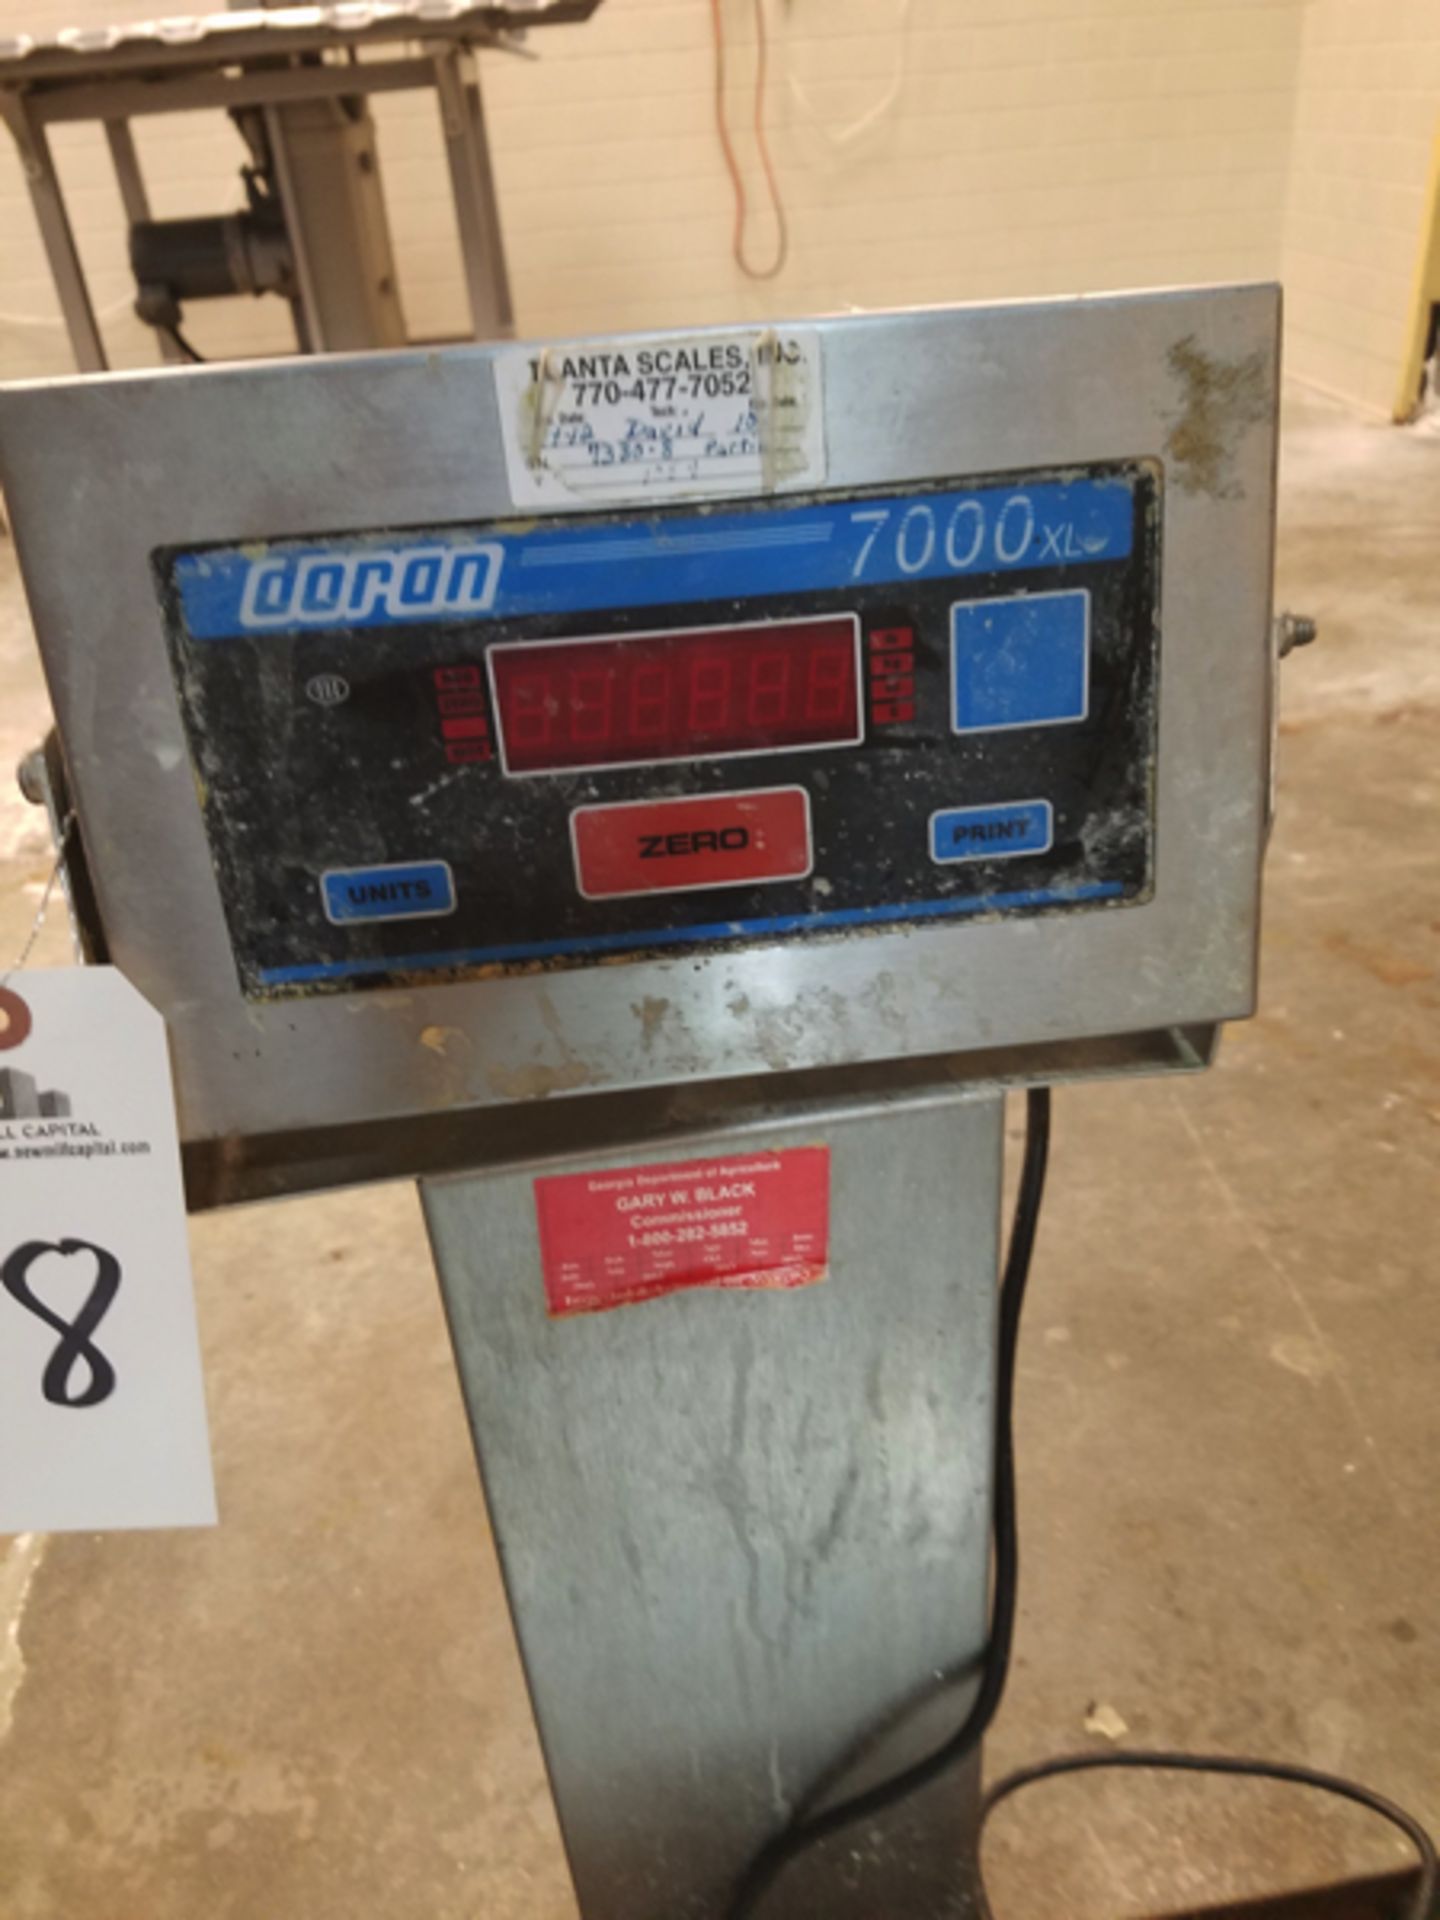 Doran Bench Scale | Rigging Price: $10 or May Hand Carry - Image 2 of 2